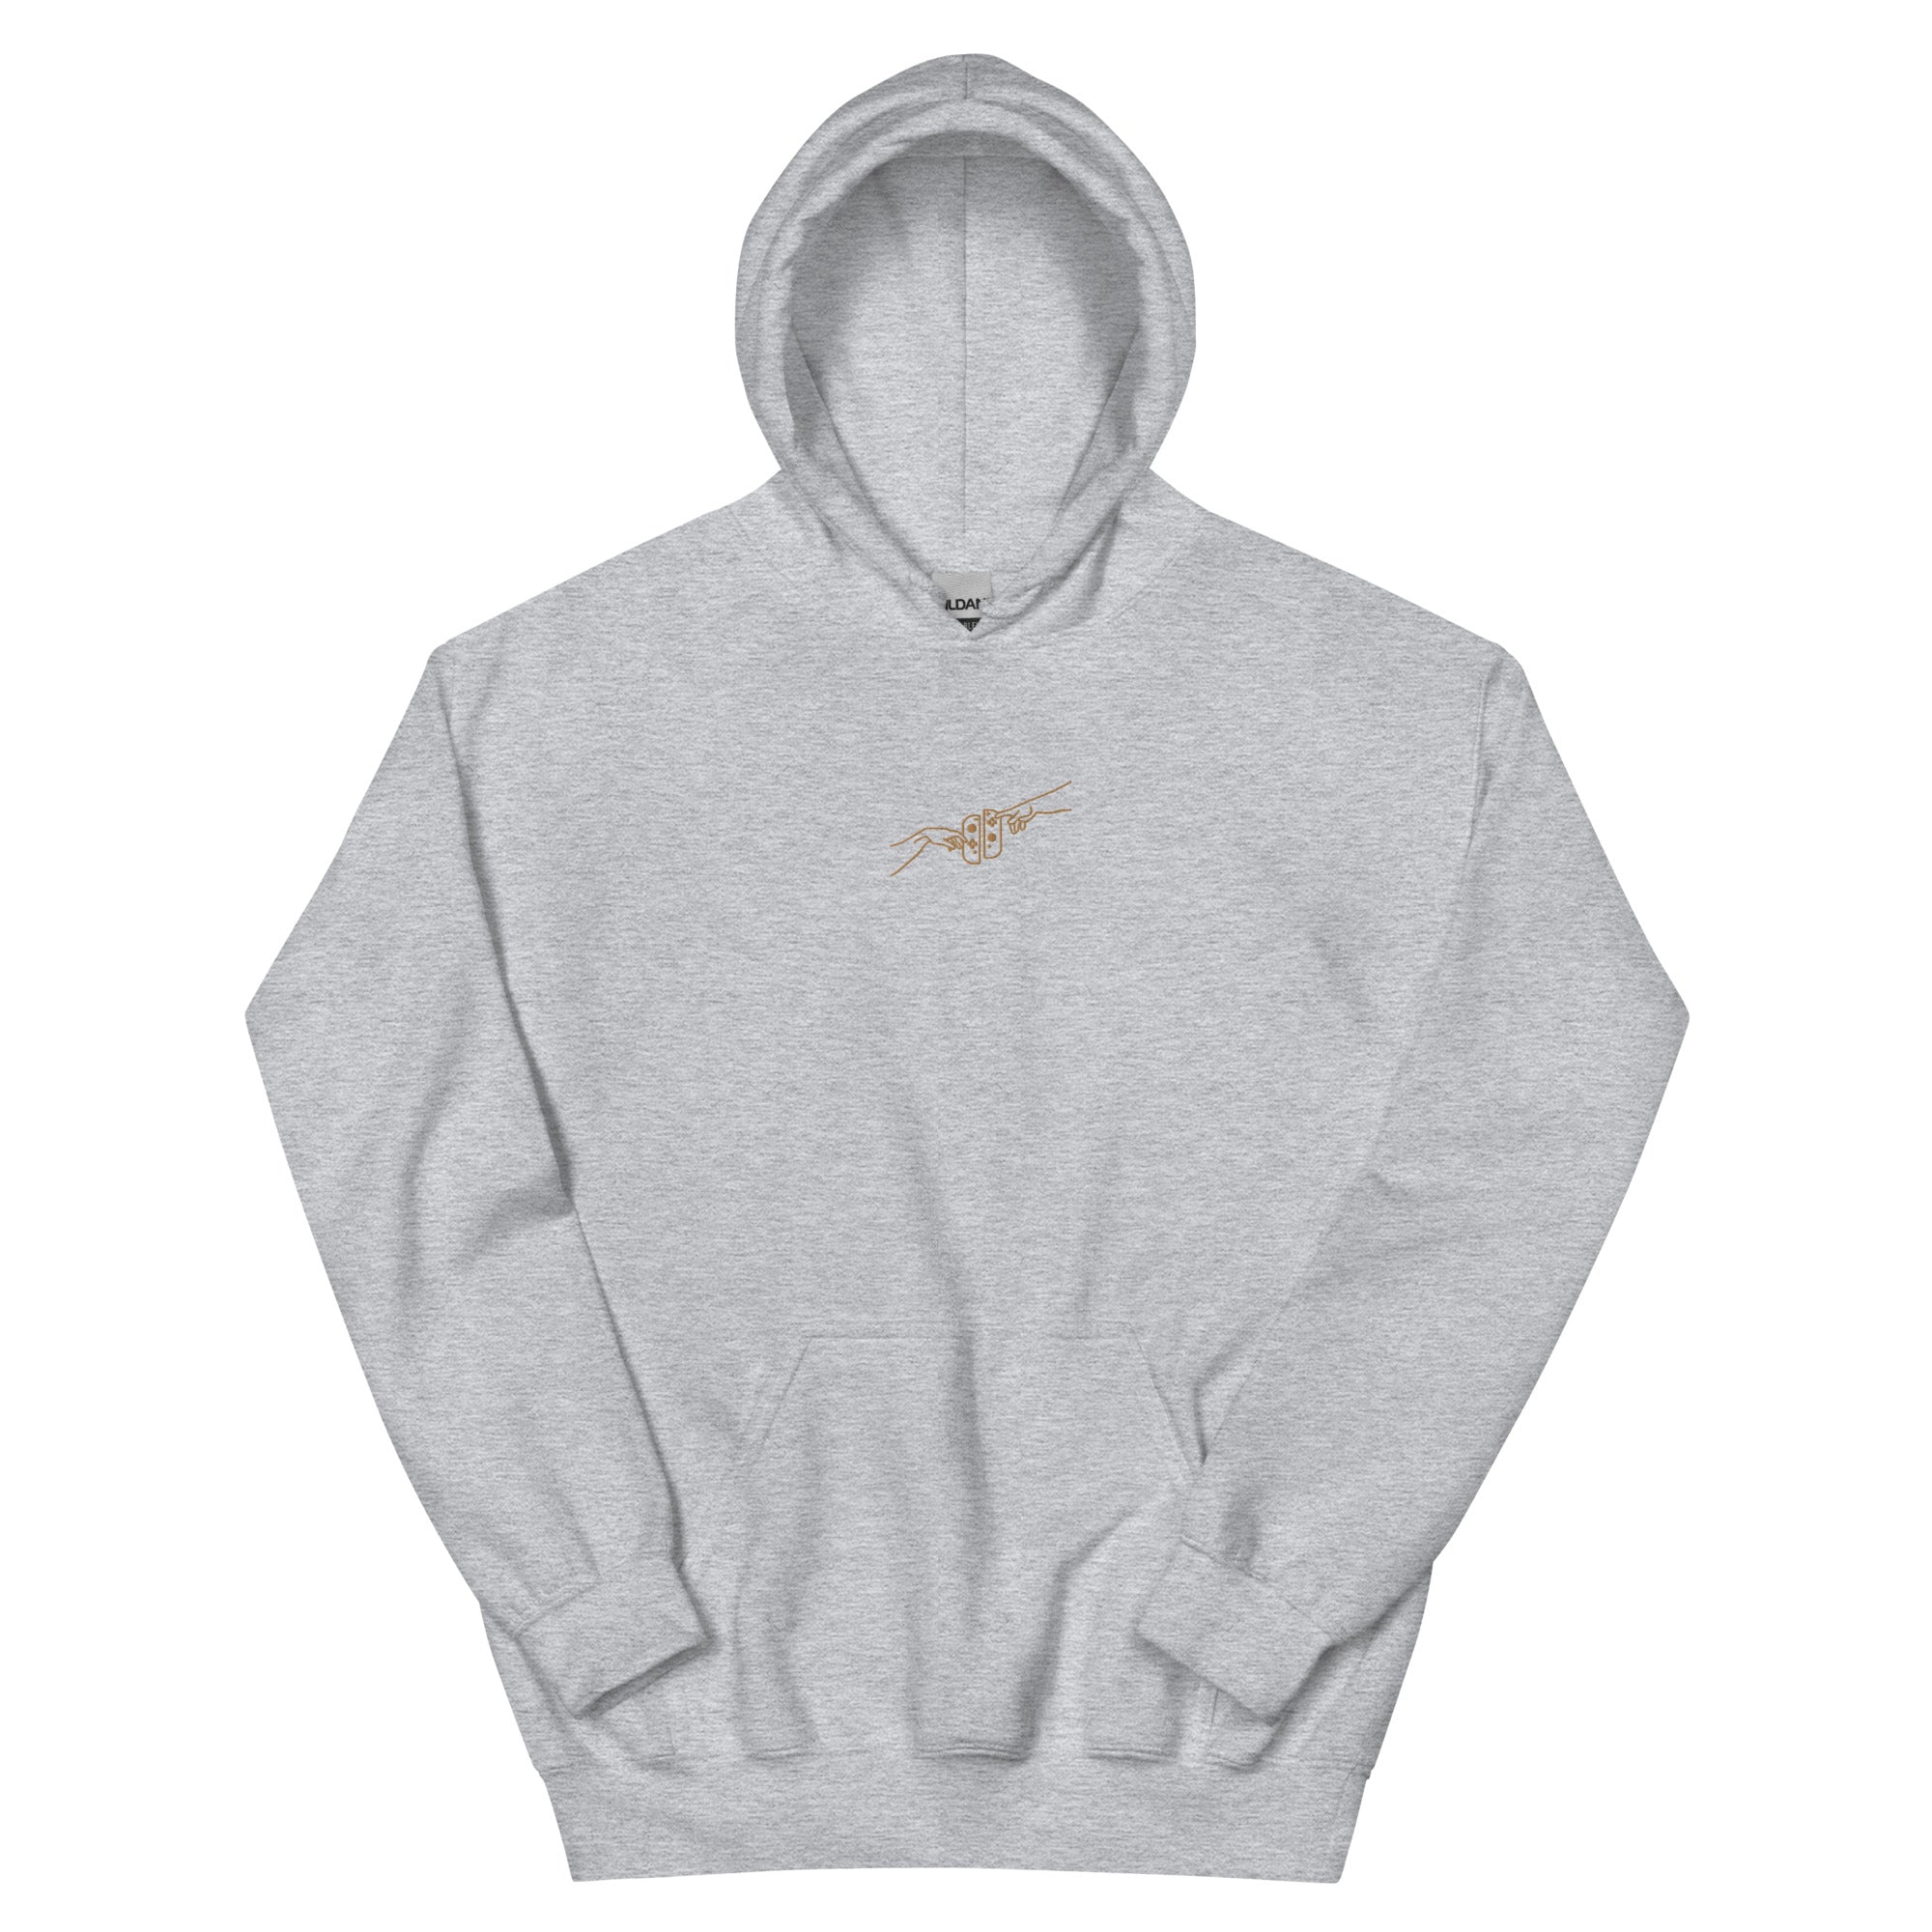 The Creation of Switch | Embroidered Unisex Hoodie | Cozy Gamer Threads and Thistles Inventory Sport Grey S 